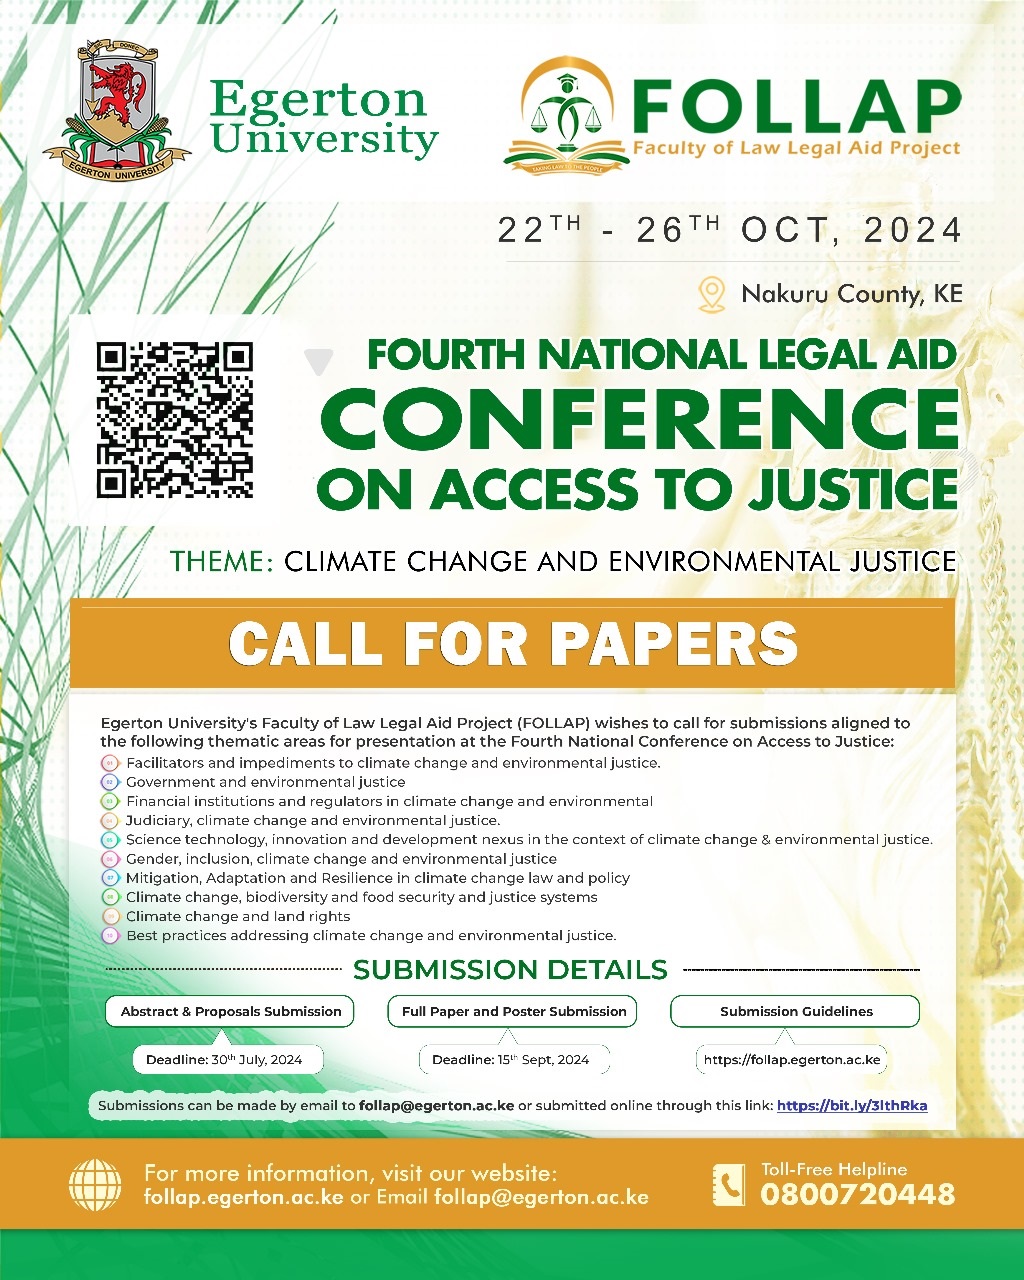 FOURTH NATIONAL LEGAL AID CONFERENCE ON ACCESS TO JUSTICE